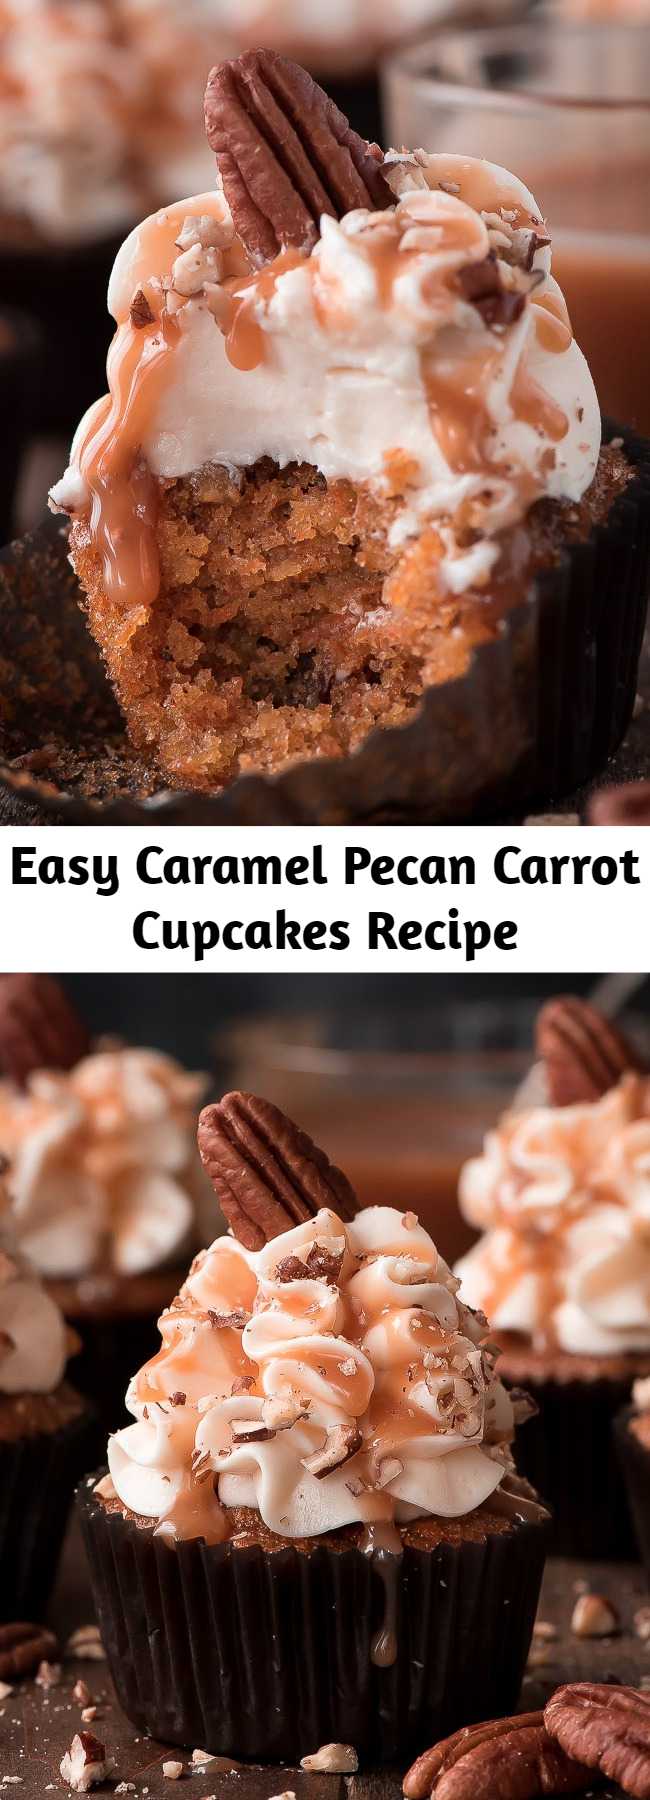 Easy Caramel Pecan Carrot Cupcakes Recipe - With a super moist cake and silky smooth cream cheese frosting, CARAMEL PECAN CARROT CUPCAKES are more than a dream come true.